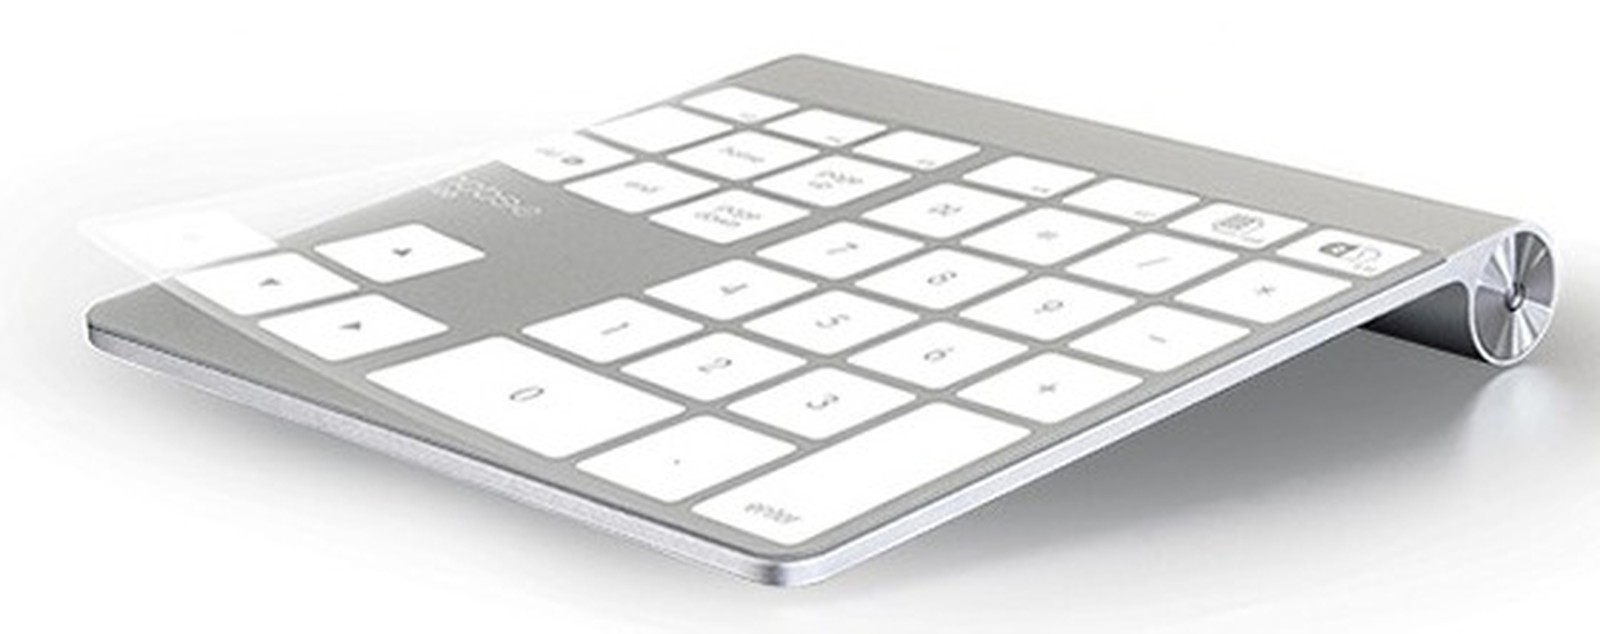 apple magic keyboard with numeric keypad review 2020